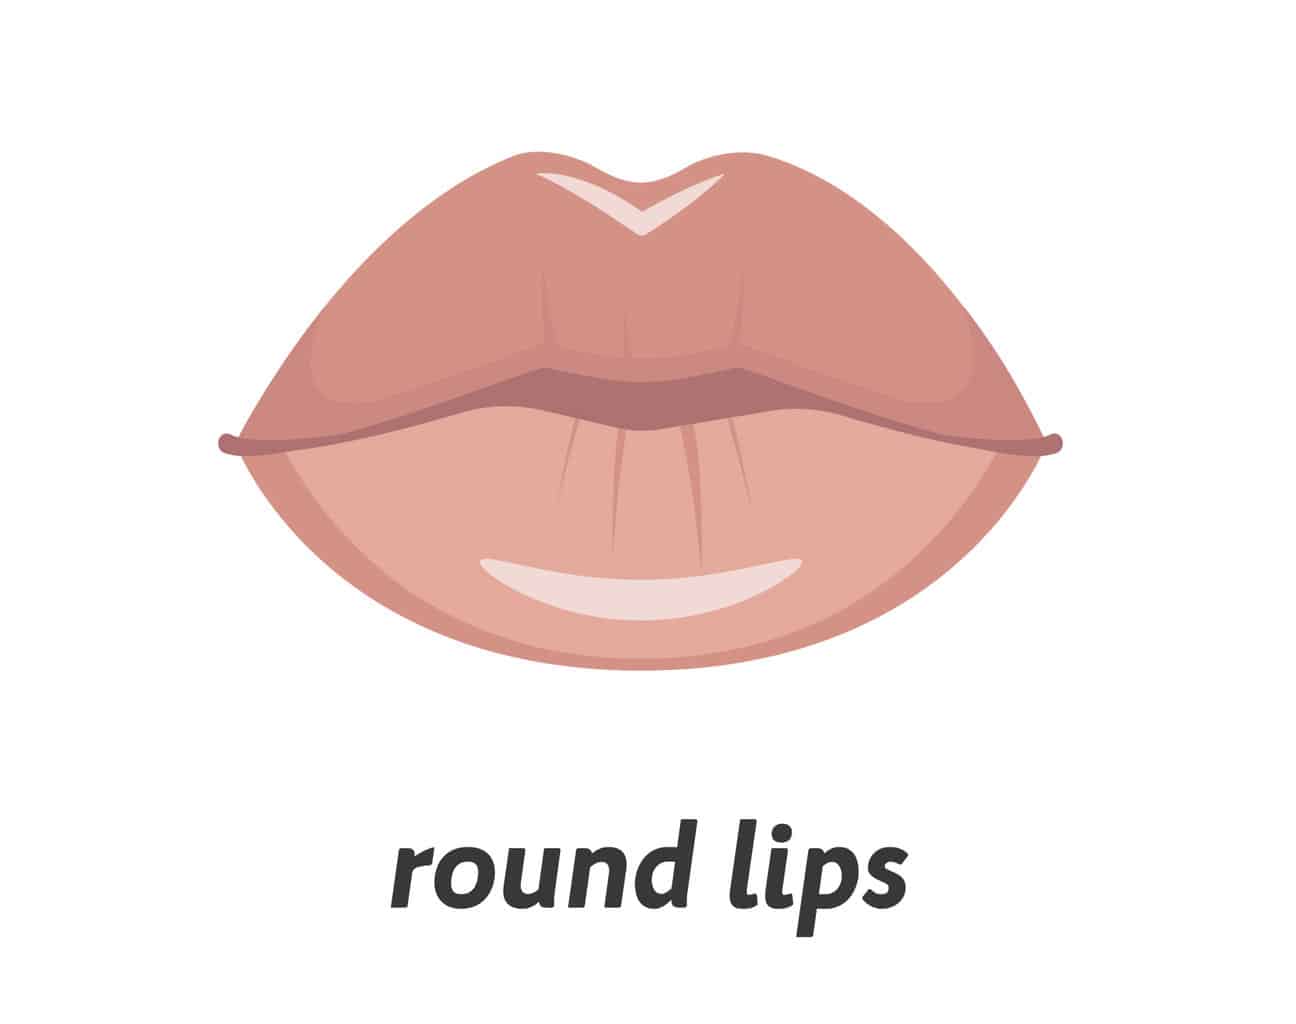 graphic of round lips with text beneath